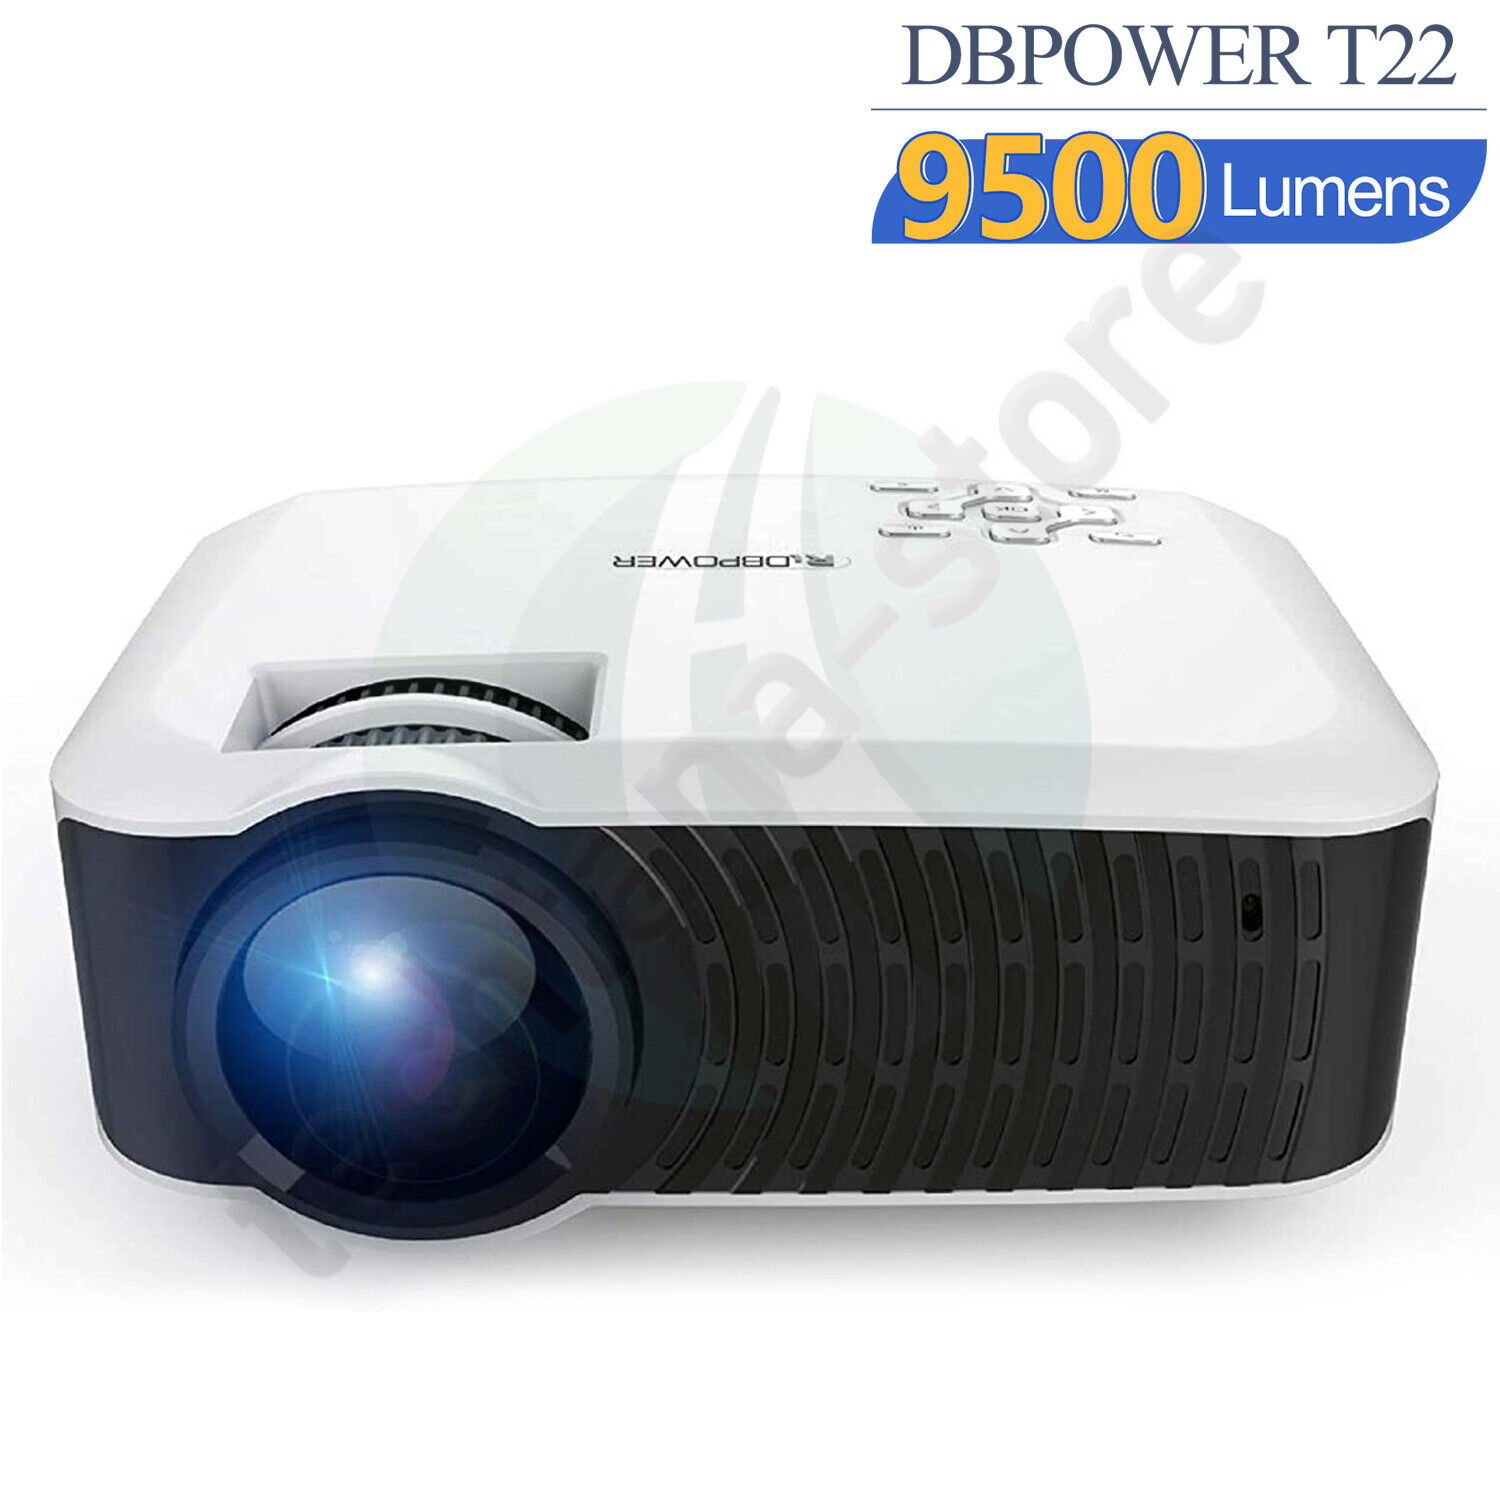 DBPOWER LED Mini Movie Projector Support 1080P Video Home Theater Cinema HDMI